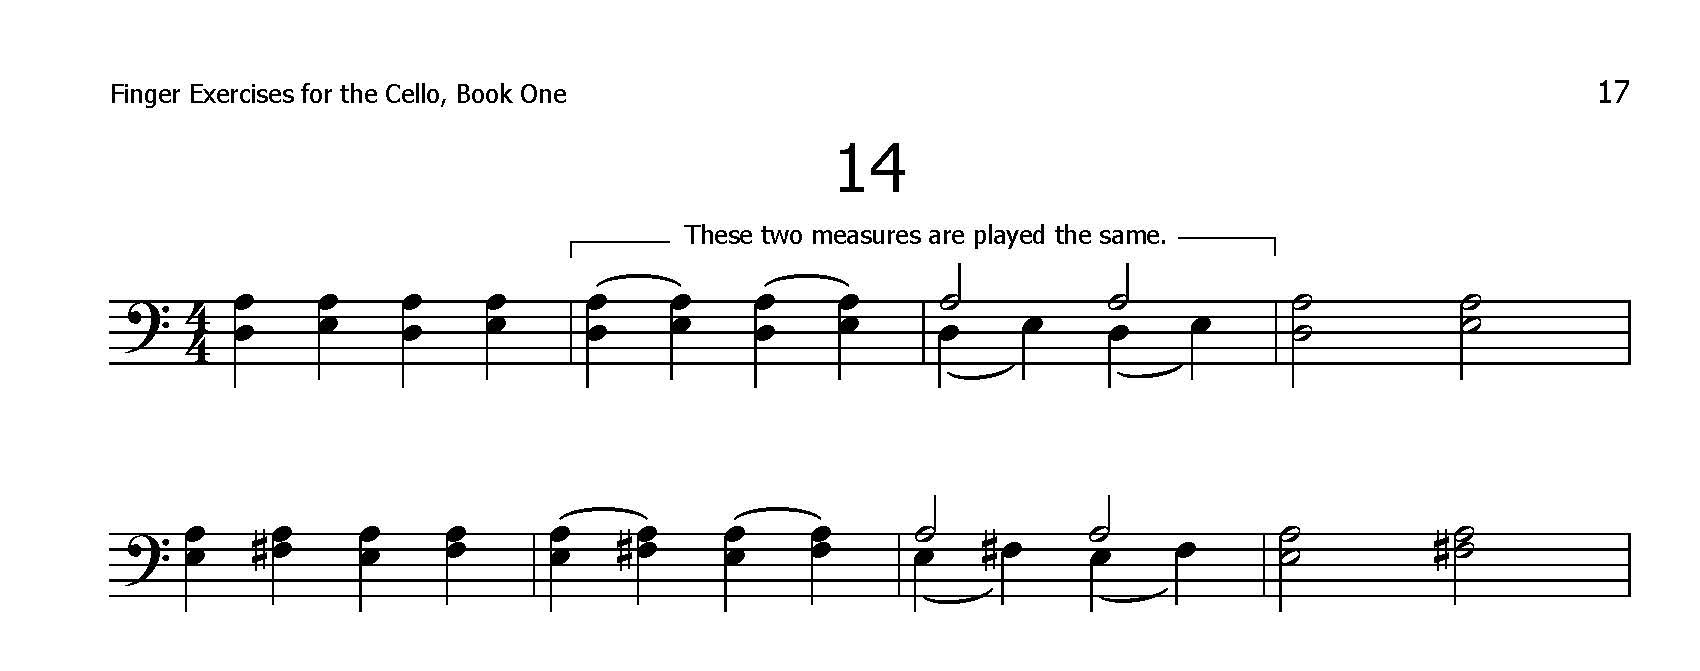 Finger Exercises for the Cello, Book One, Exercise 14